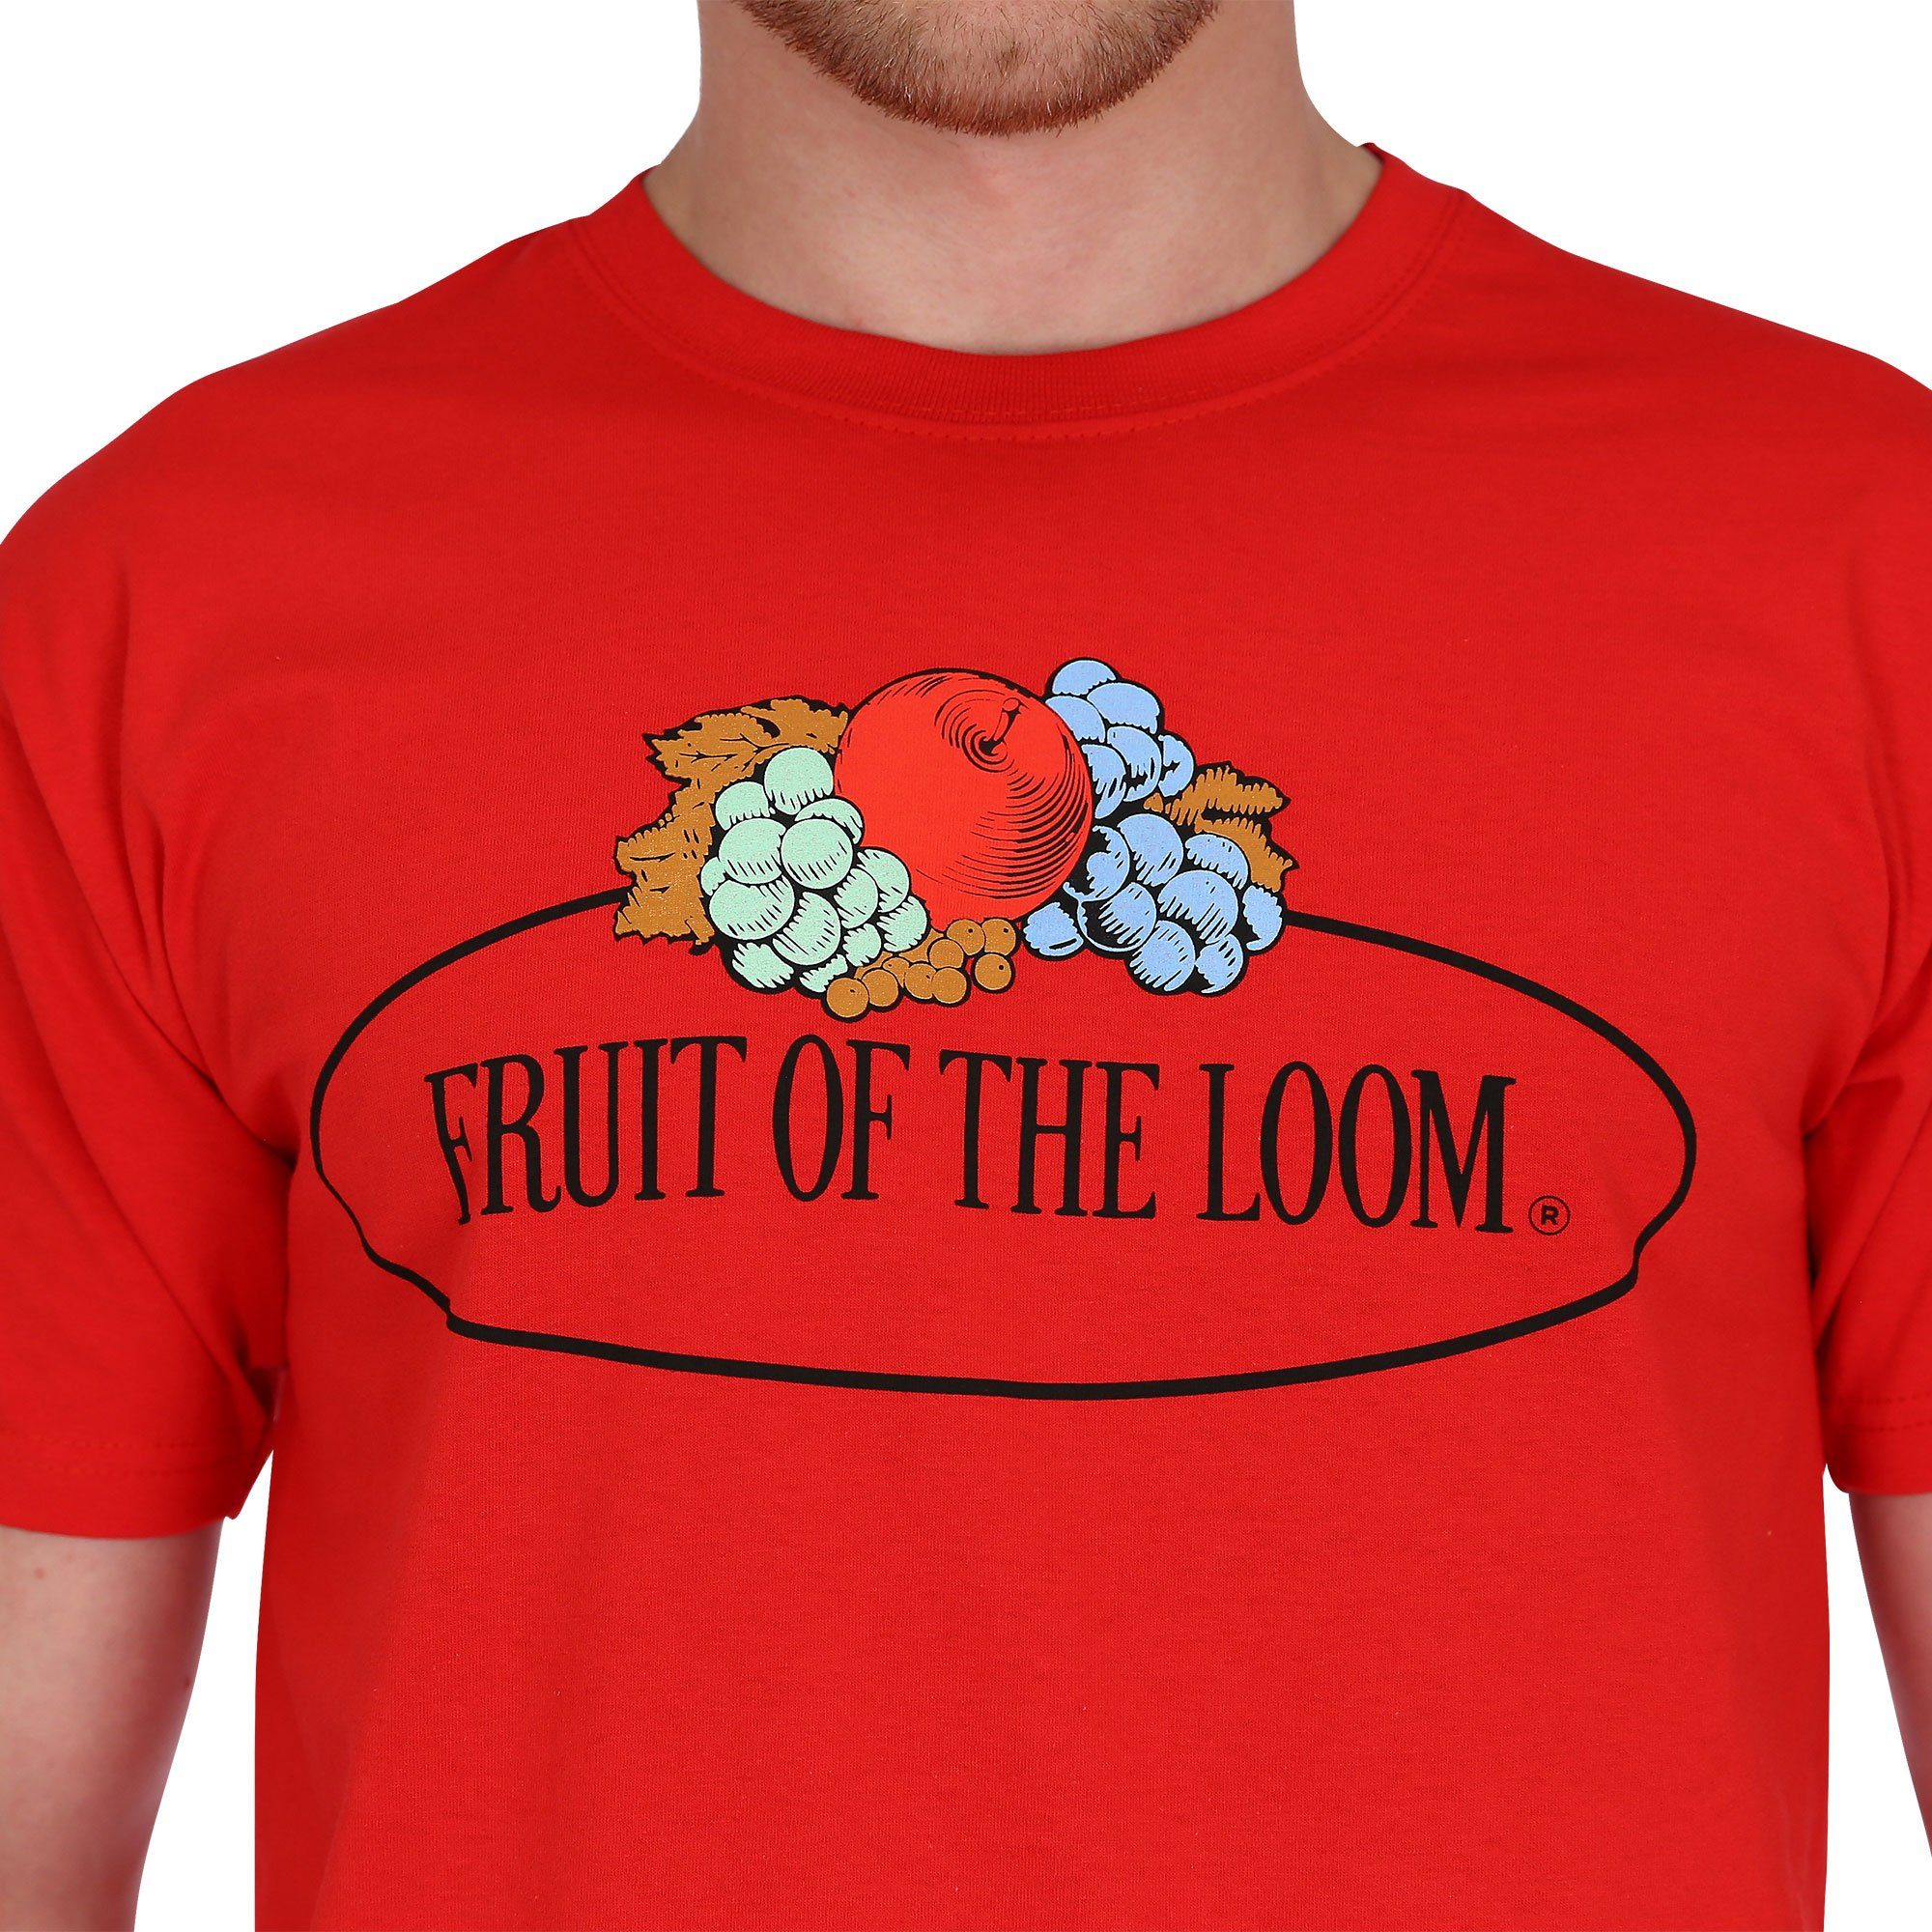 Fruit of the Loom of the Fruit rot Logo Vintage Loom Rundhalsshirt Fruit the Loom of mit T-Shirt